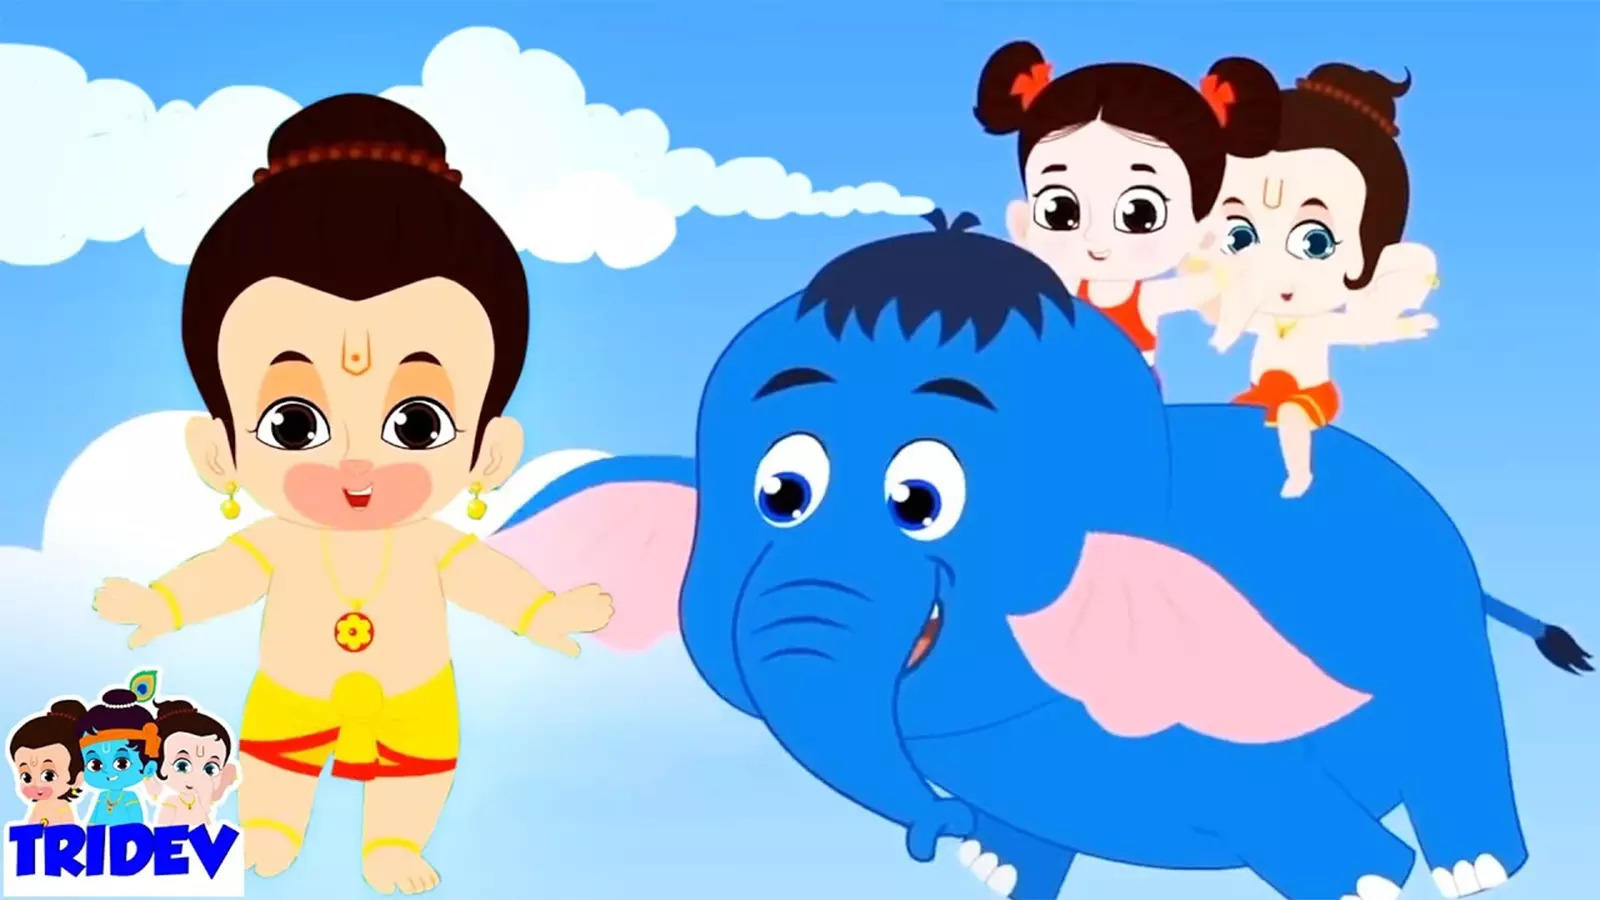 Watch Latest Children Hindi Nursery Rhyme 'Udane Wala Hathi' For Kids -  Check Out Fun Kids Nursery Rhymes And Baby Songs In Hindi | Entertainment -  Times of India Videos